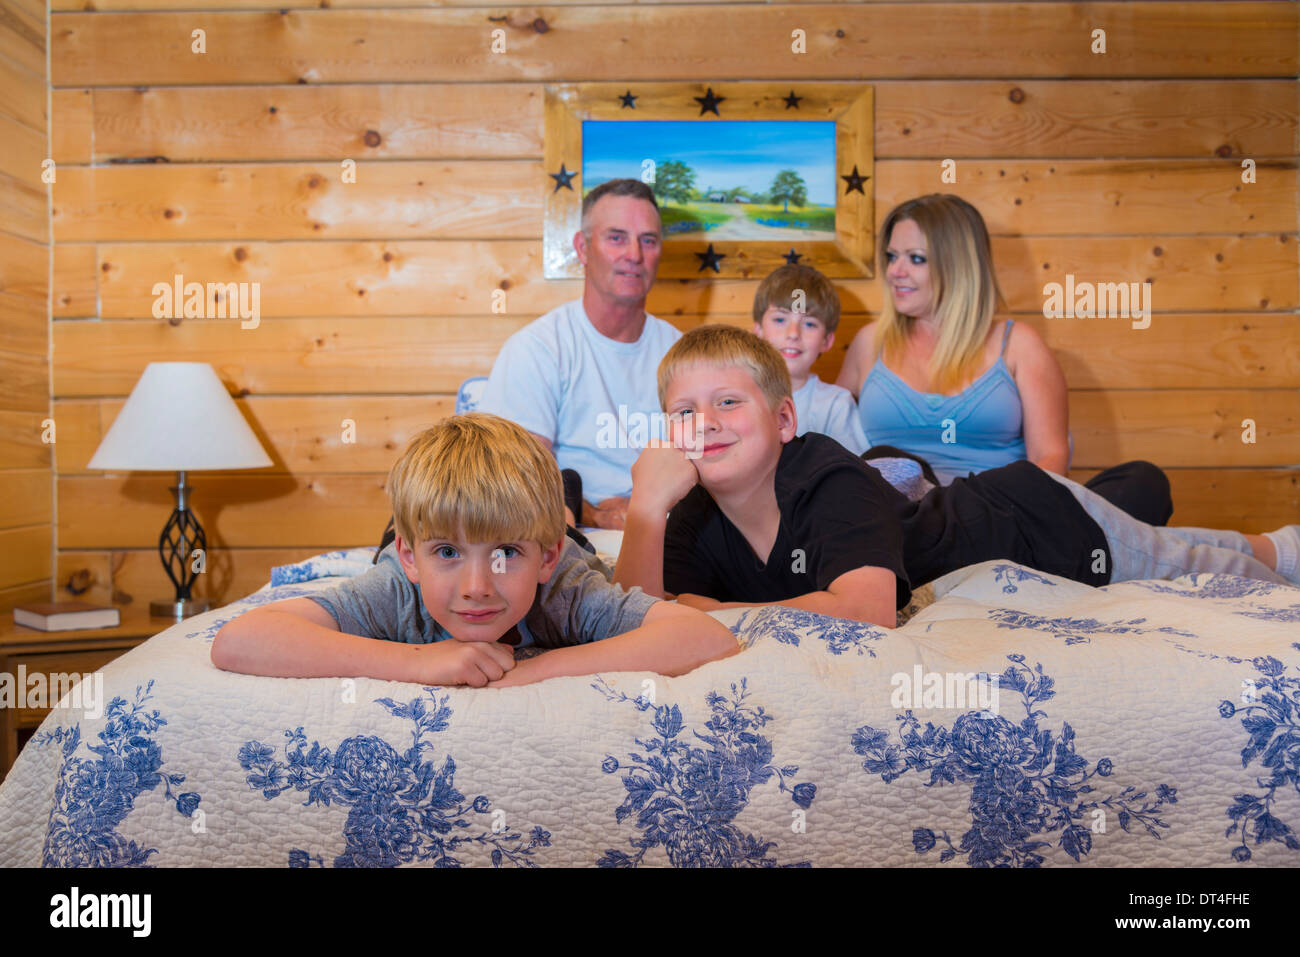 Family in bed Stock Photo